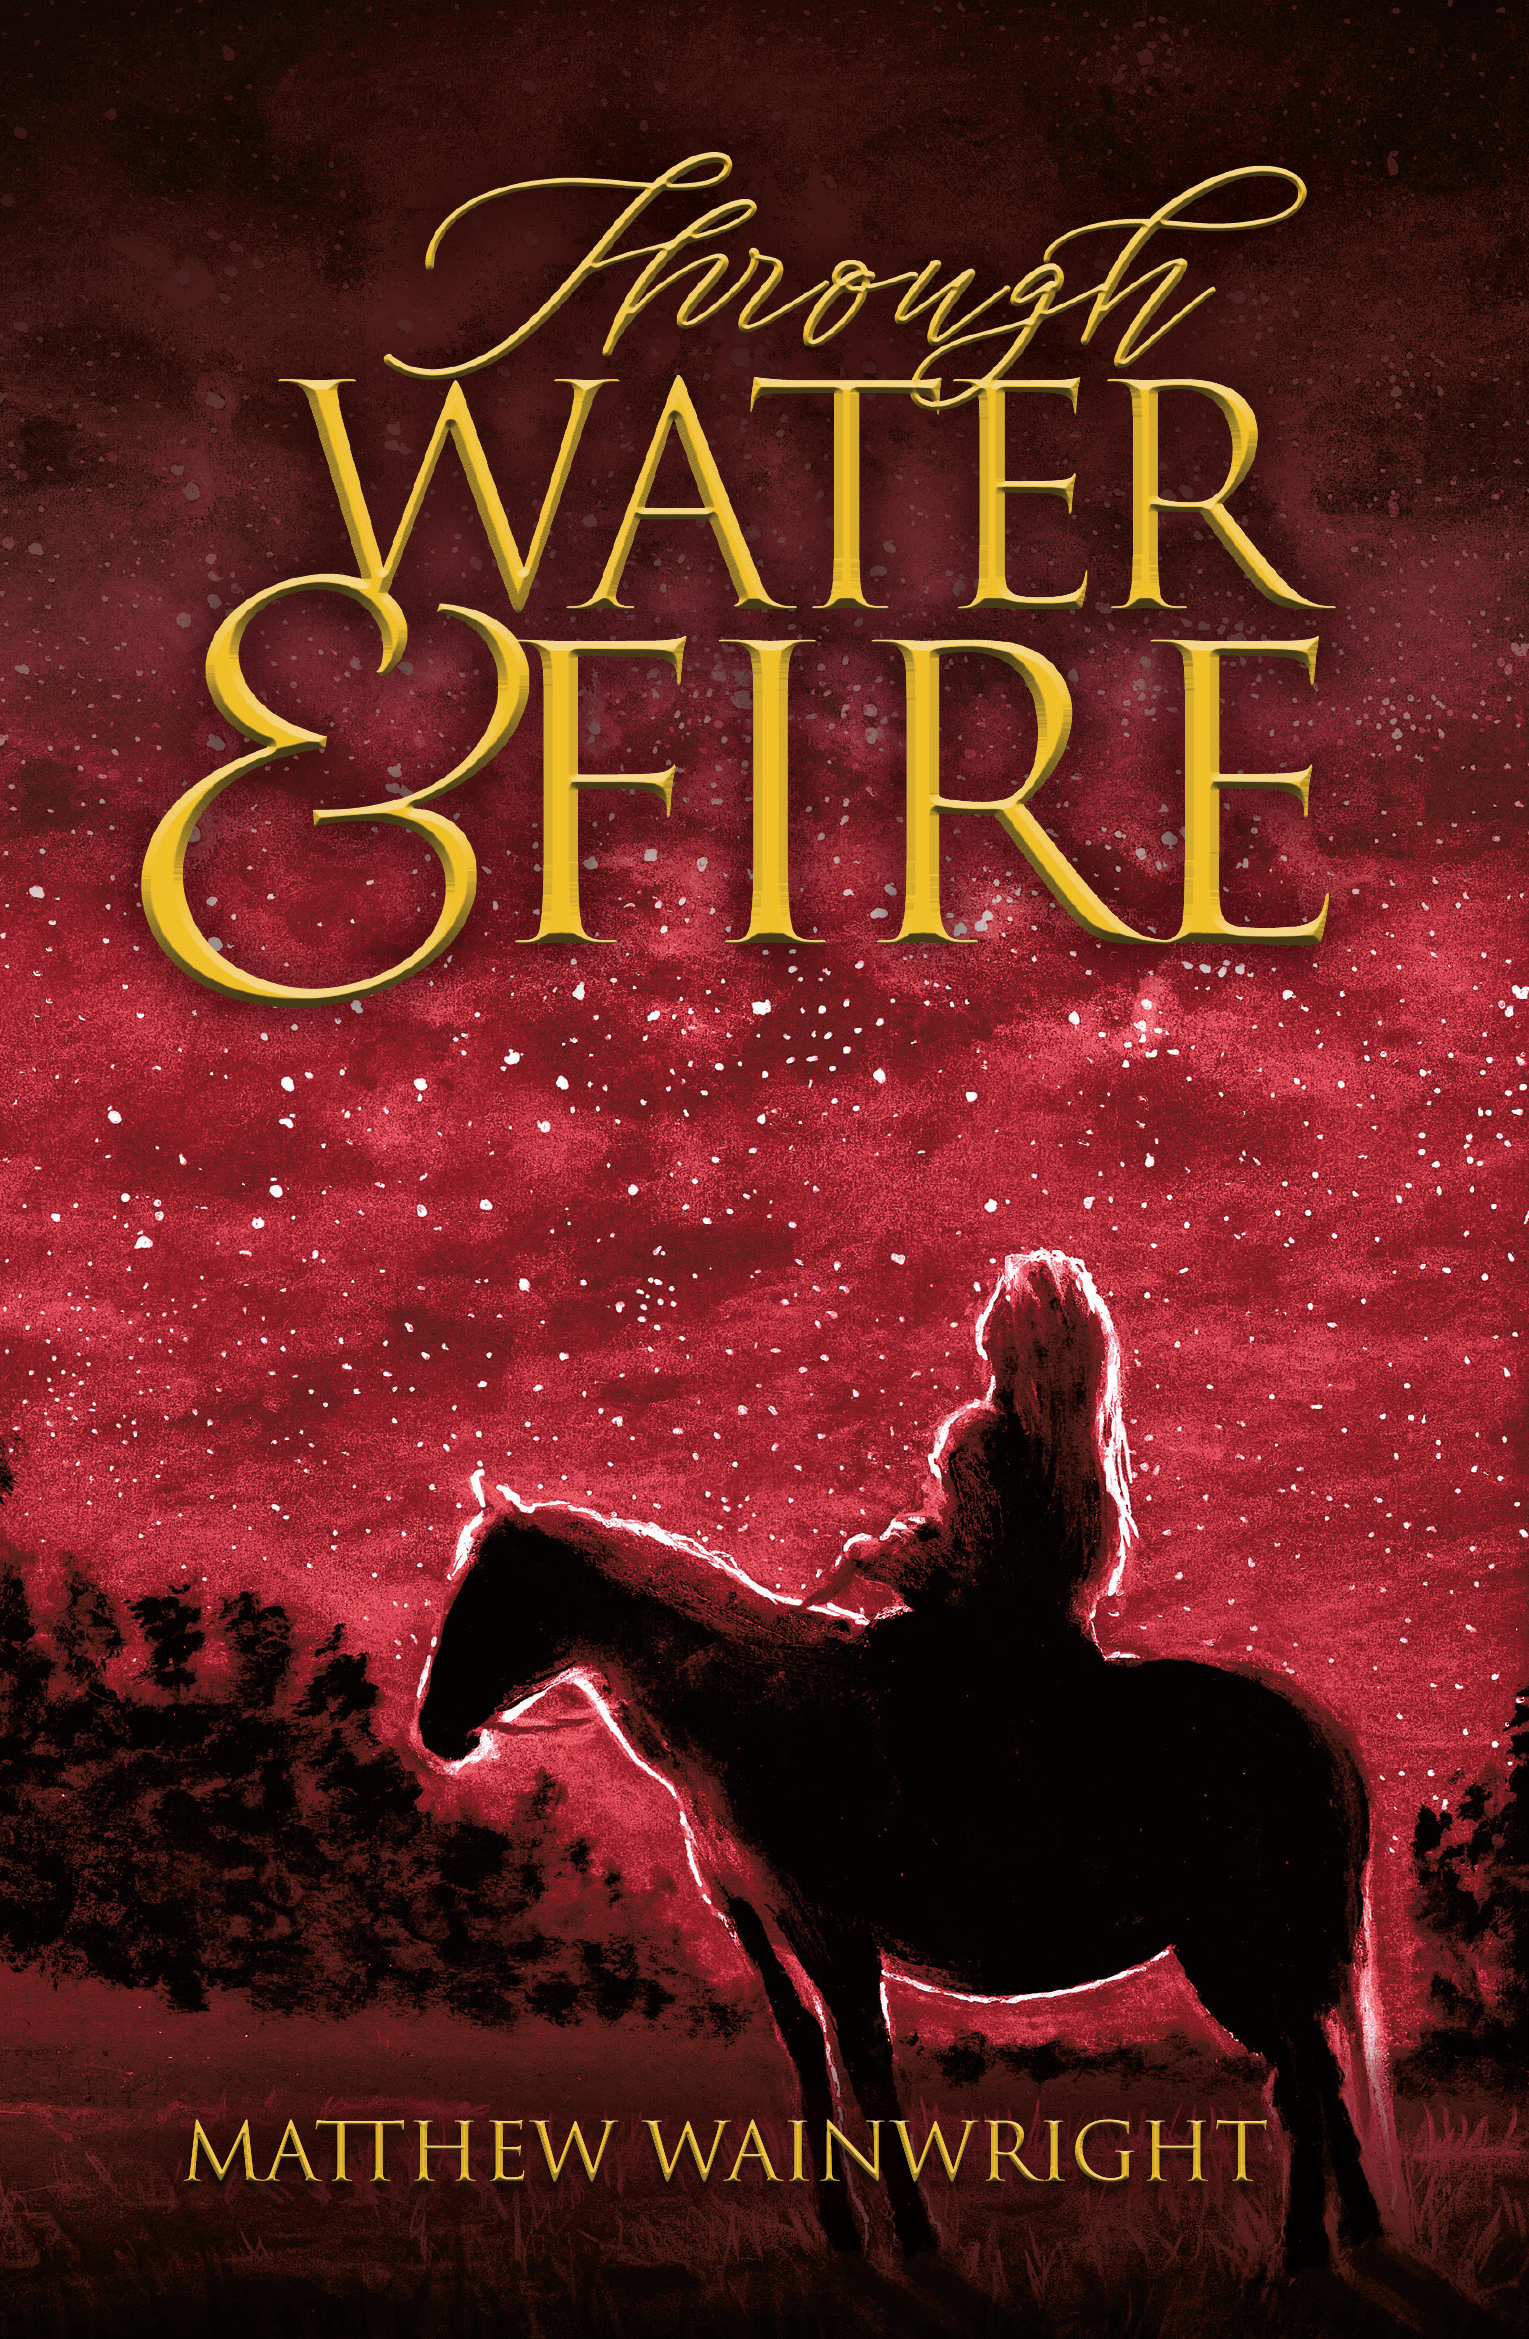 Cover for 'Through Water and Fire' by Matthew Wainwright